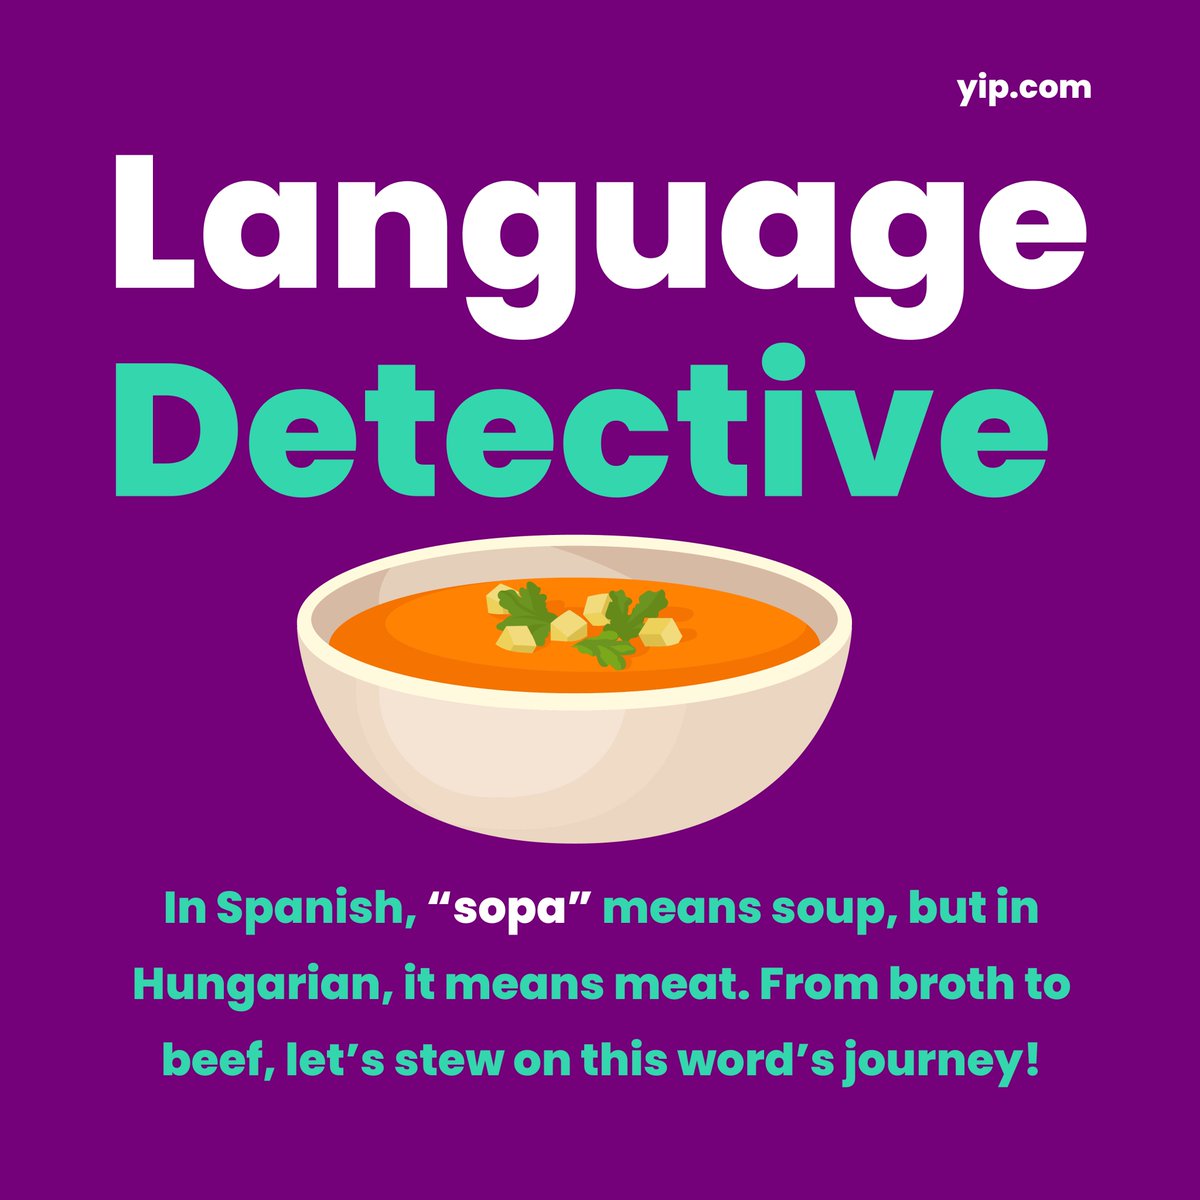 From Broth to Beef: A Culinary Journey with 'Sopa' 🍲🥩 Exploring the delicious diversity of a word that means soup in Spanish and meat in Hungarian #LanguageLove #FoodieAdventure